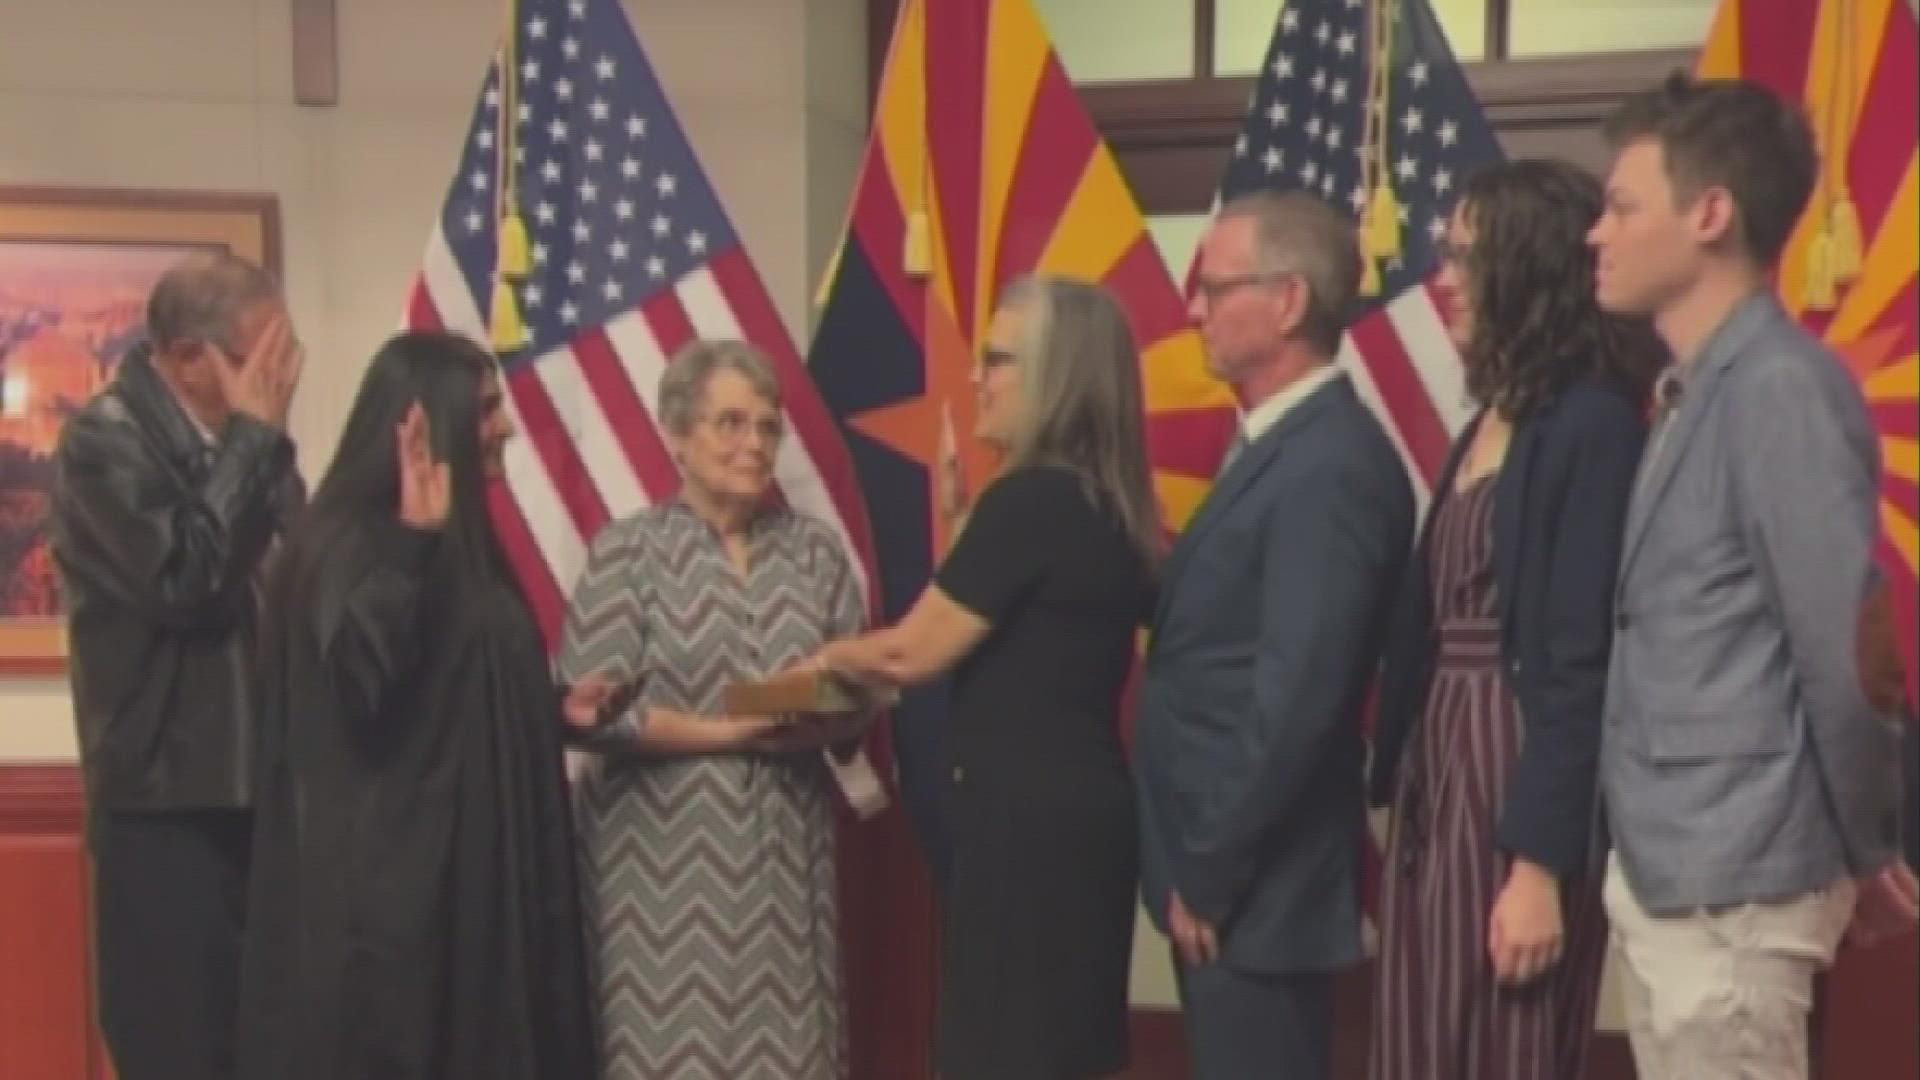 Arizona has now had five women serve as the state's top executive, which is a nationwide record.